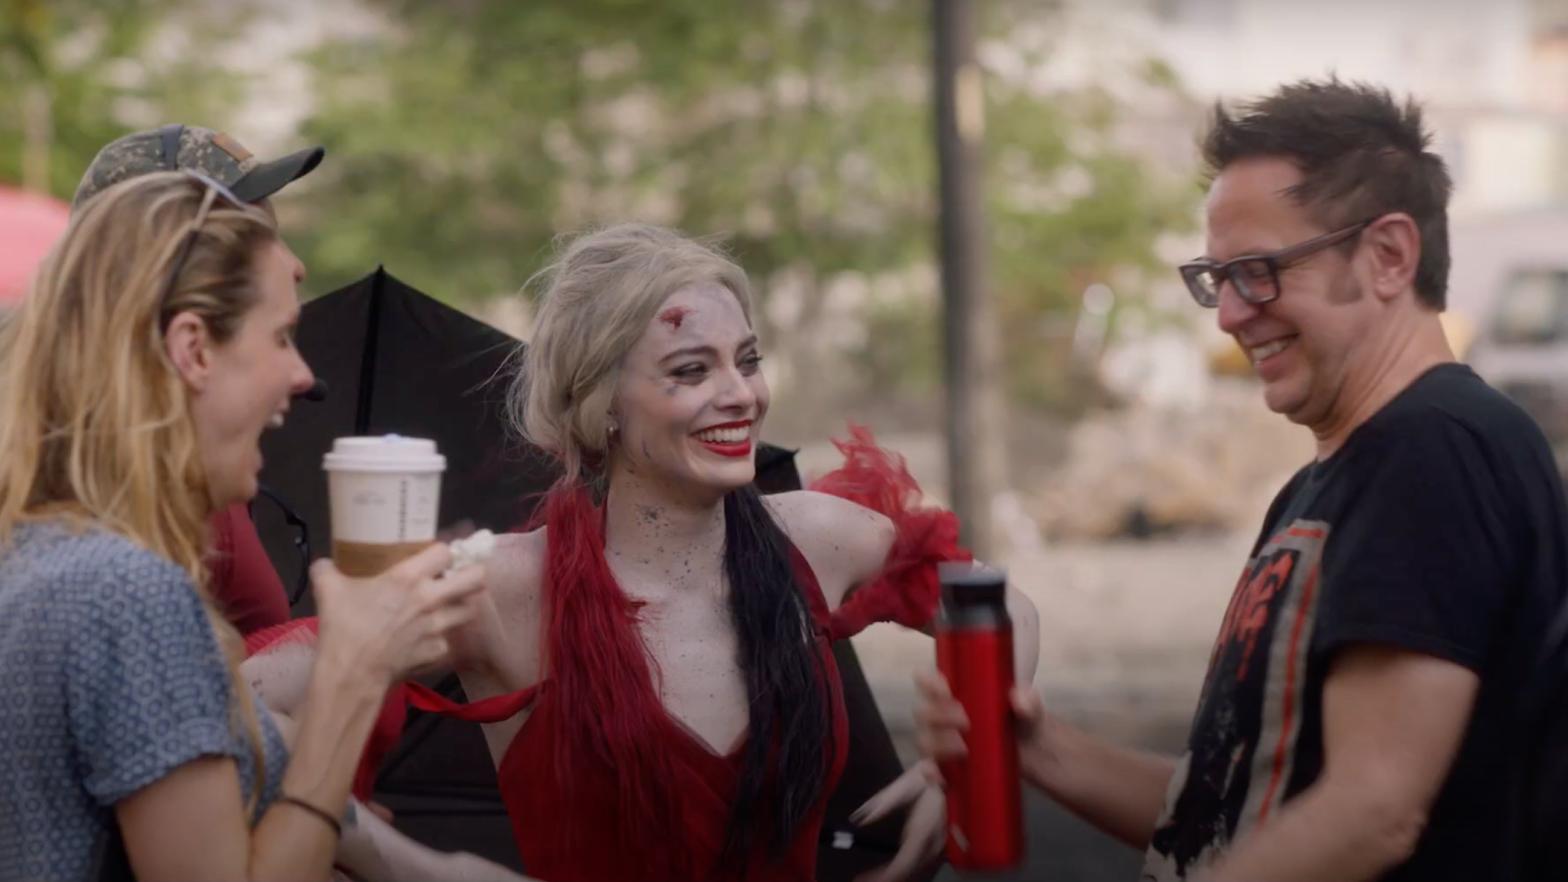 James Gunn and Margot Robbie behind the scenes of The Suicide Squad. (Screenshot: Warner Bros.)